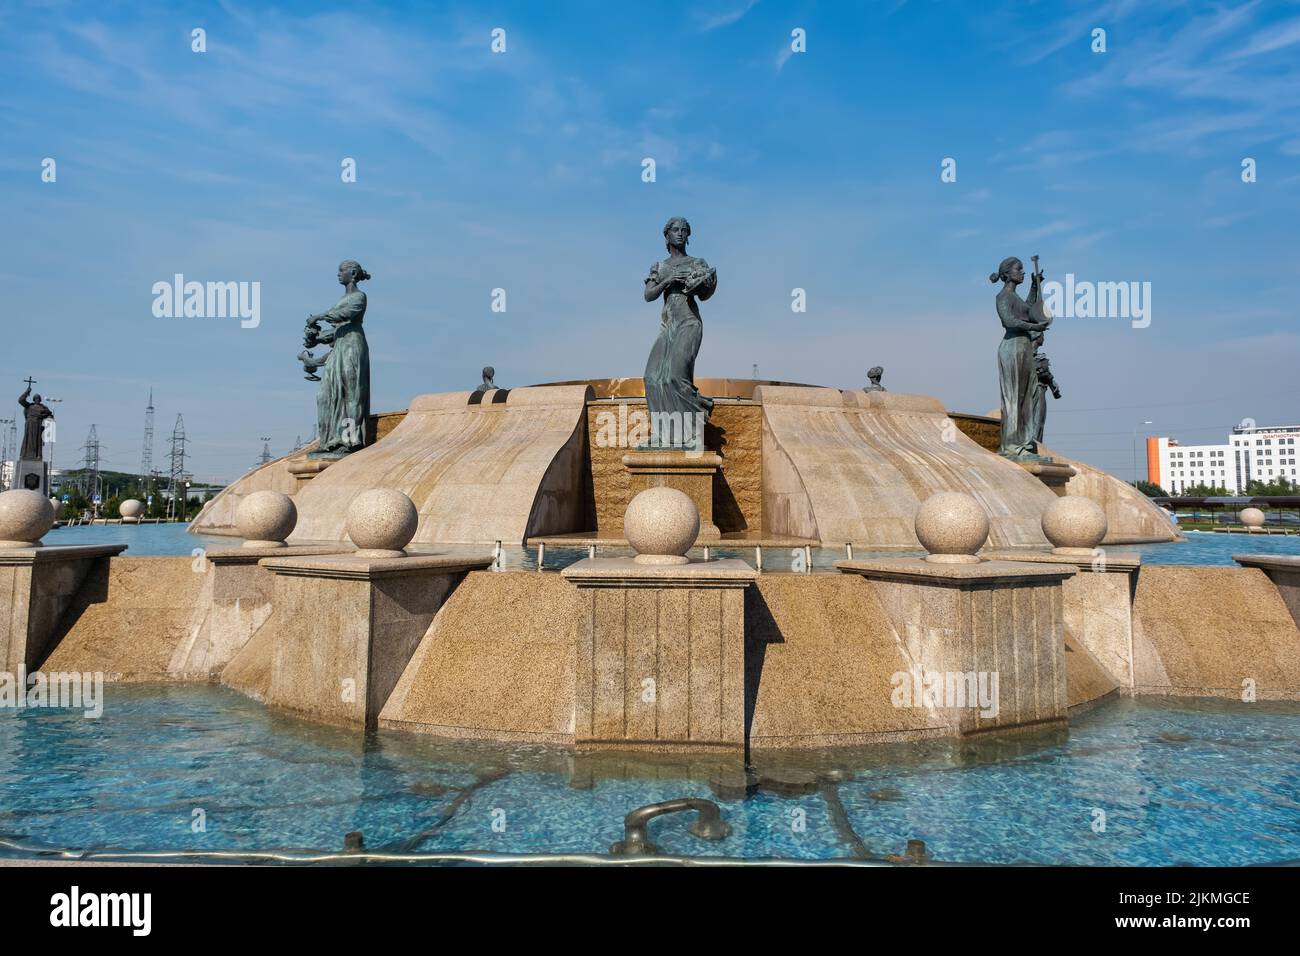 Day view of statues at fountain at Vladimir square at Stavropol, Russia  Stock Photo